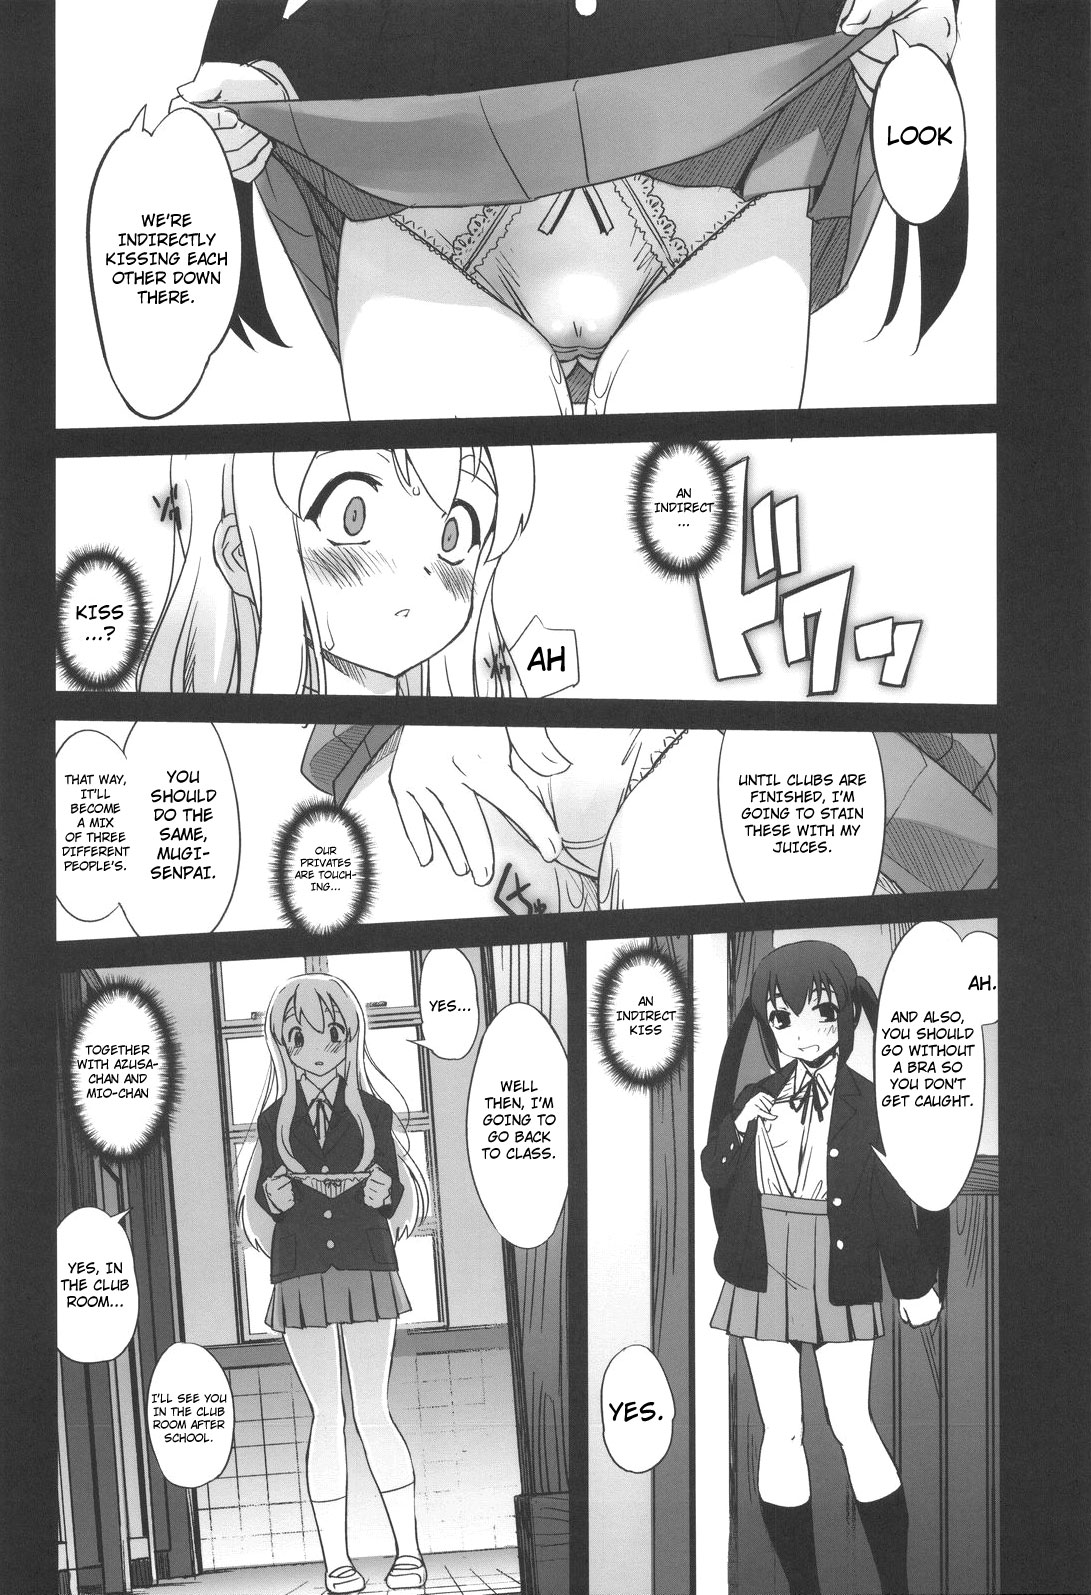 (C76) [G-Power! (Sasayuki)] Nekomimi to Toilet to Houkago no Bushitsu | Cat Ears And A Restroom And The Club Room After School (K-ON) [English] [Nicchiscans-4Dawgz] page 19 full